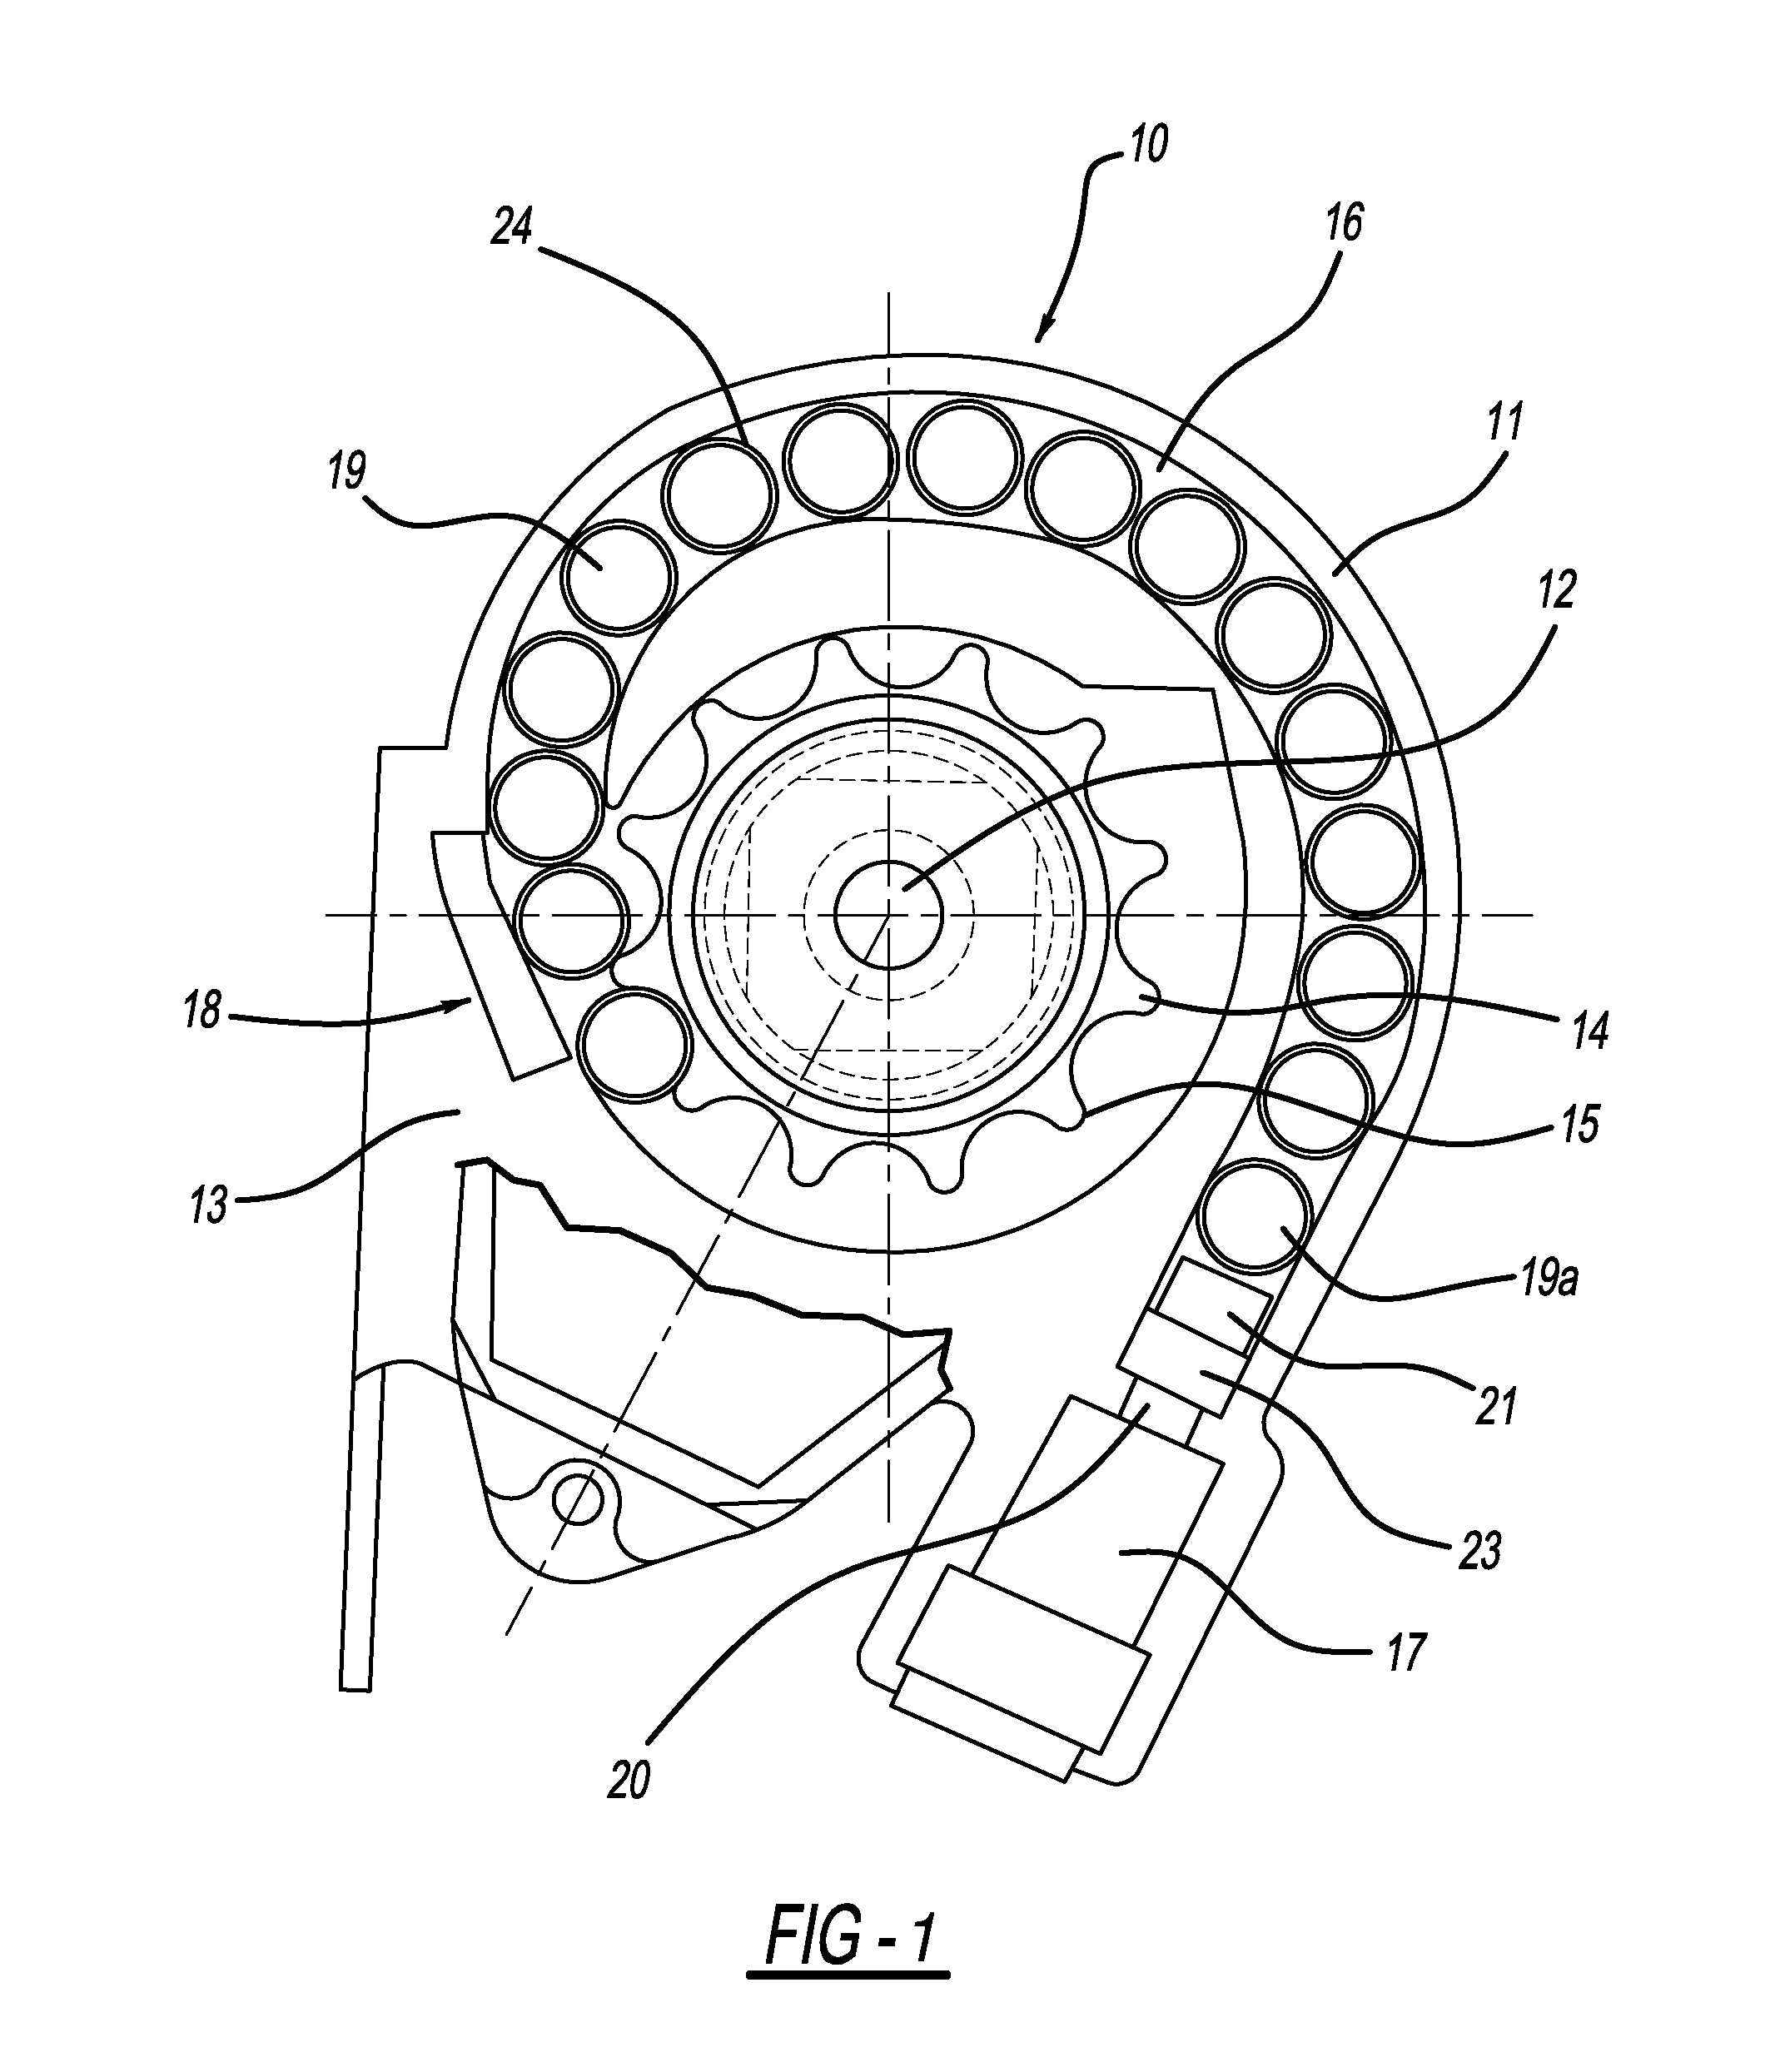 Pretensioning device for a safety belt